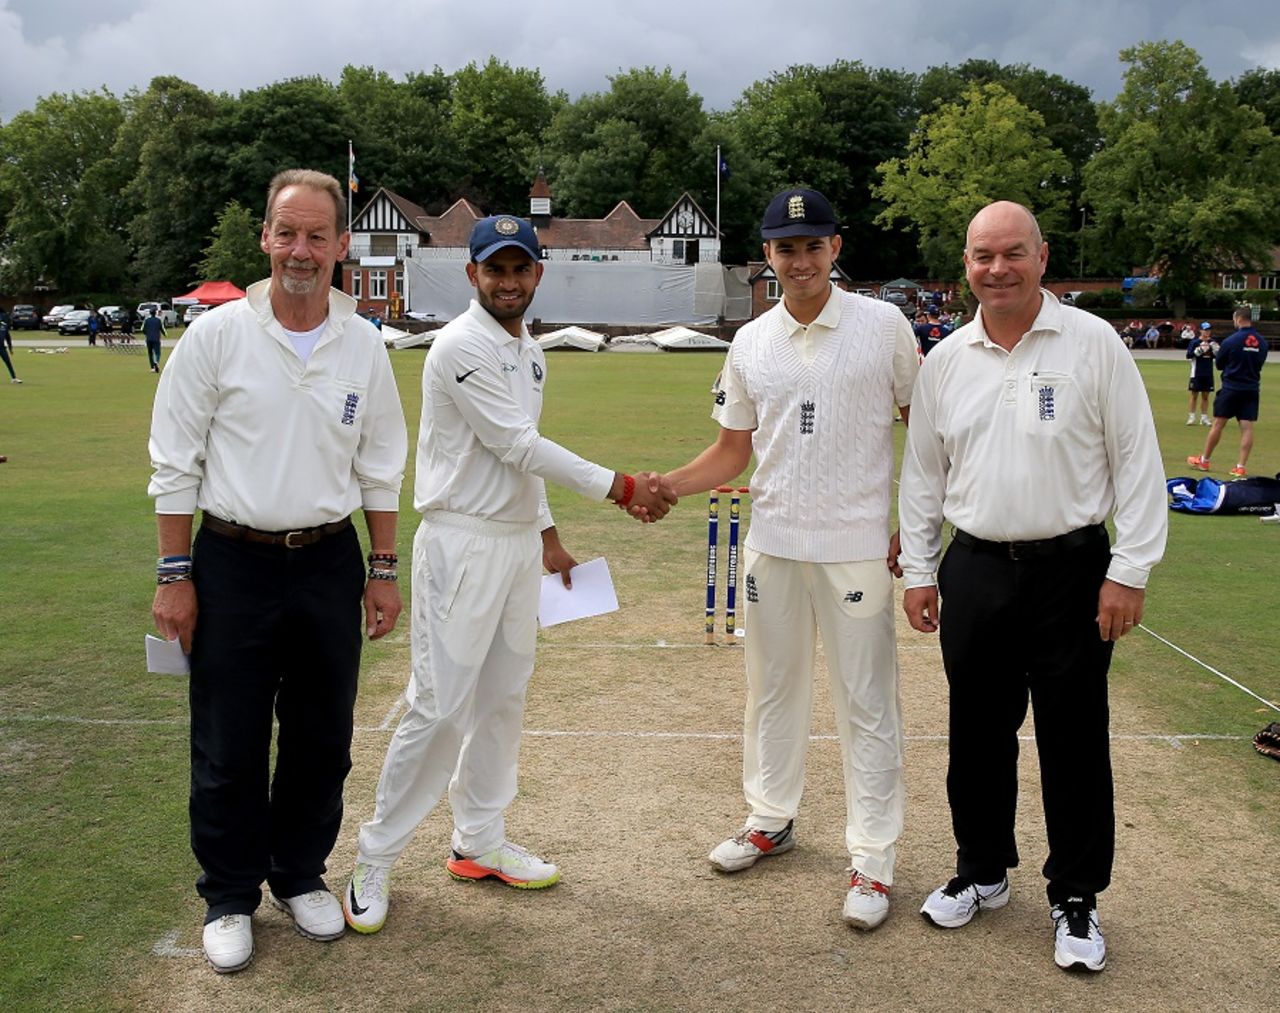 Himanshu Rana and Max Holden shake hands at the toss, England Under-19s v India Under-19s, 1st Youth Test, Chesterfield, July 23, 2017